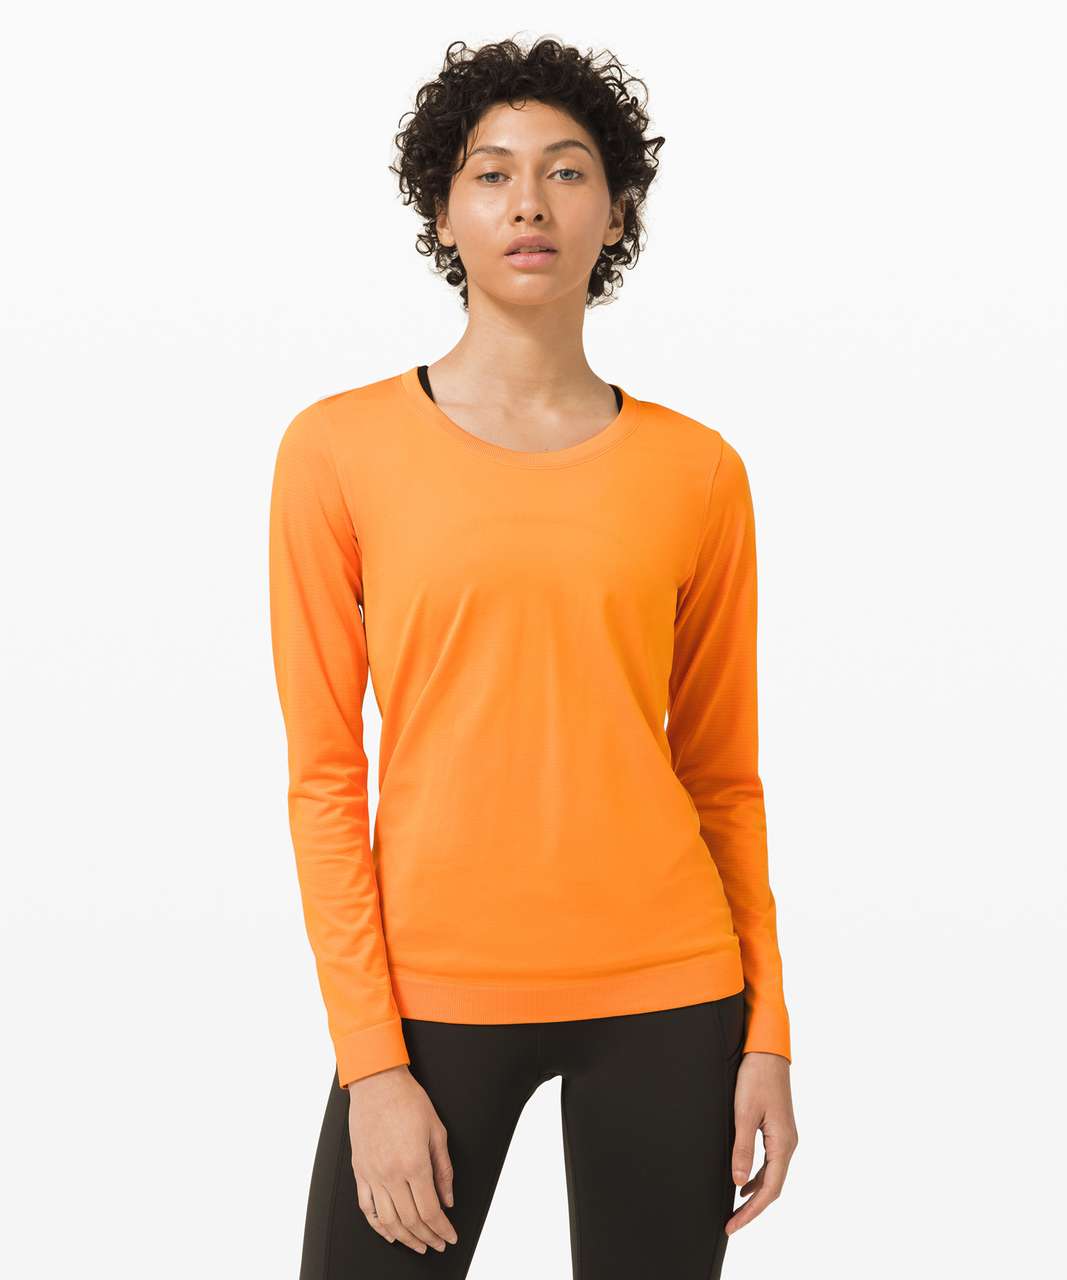 Lululemon Swiftly Relaxed Long Sleeve 2.0 - Tiger / Tiger